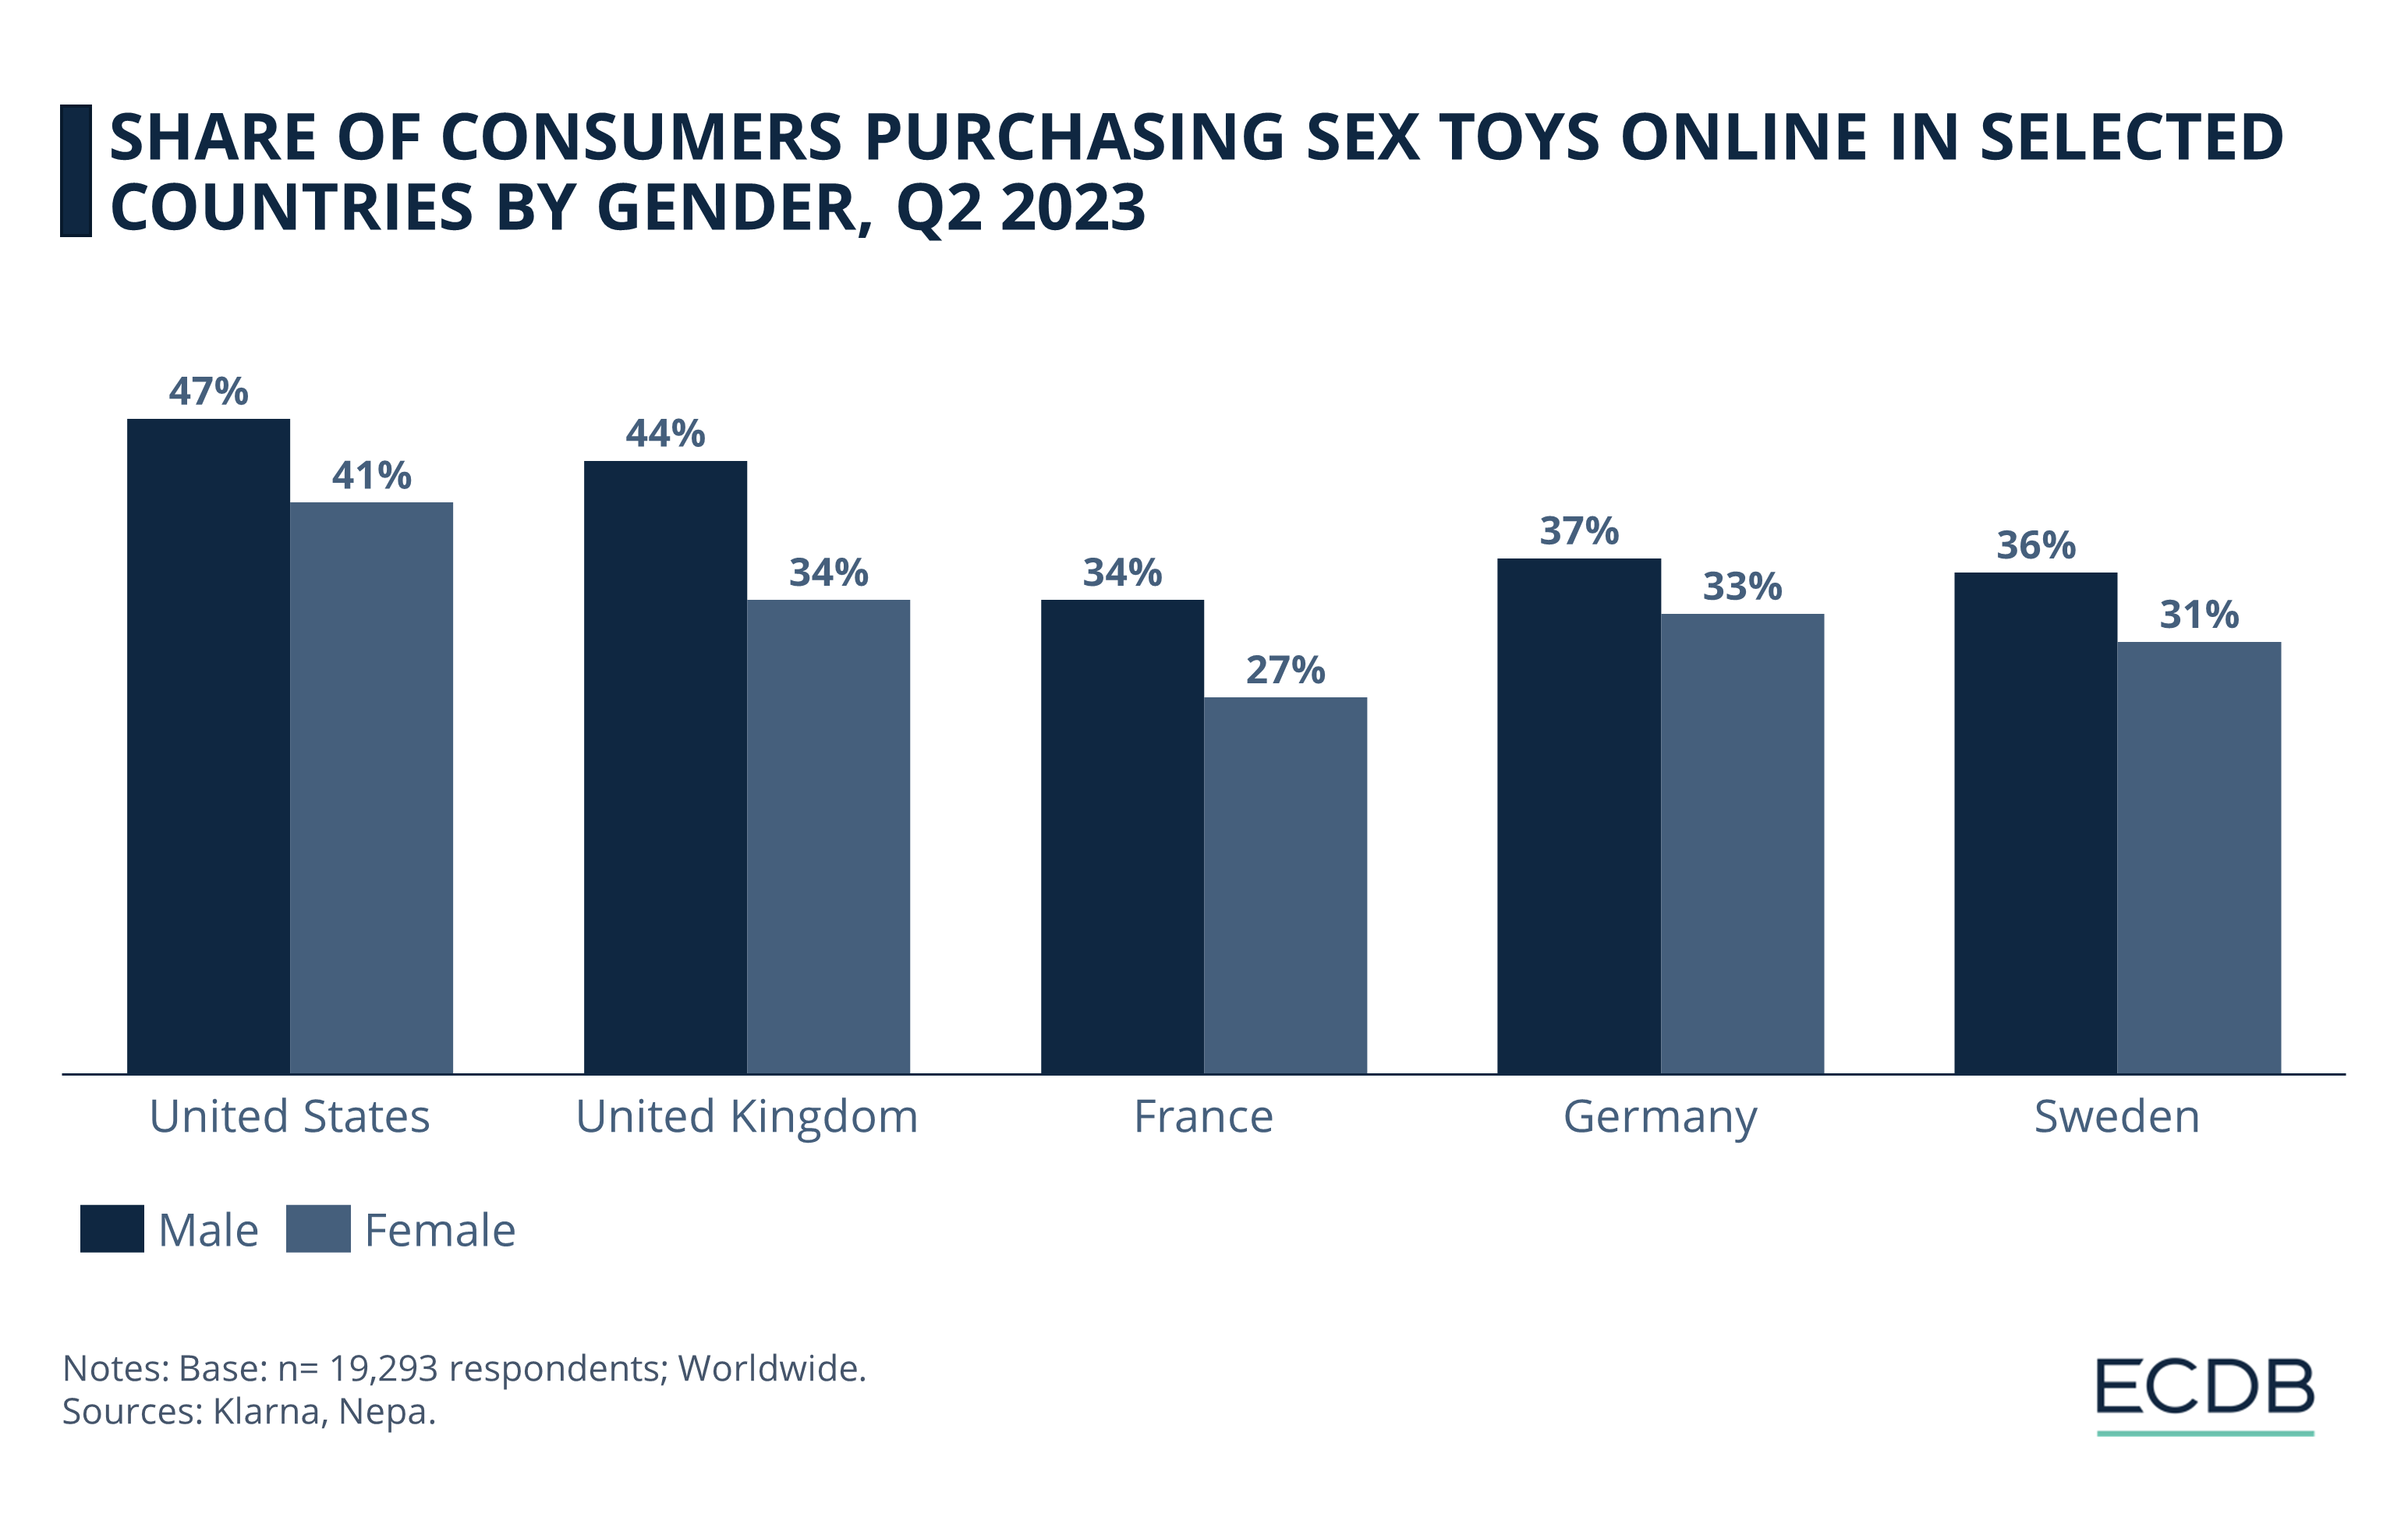 Share of Consumers Purchasing Sex Toys Online in Selected Countries by Gender, Q2 2023